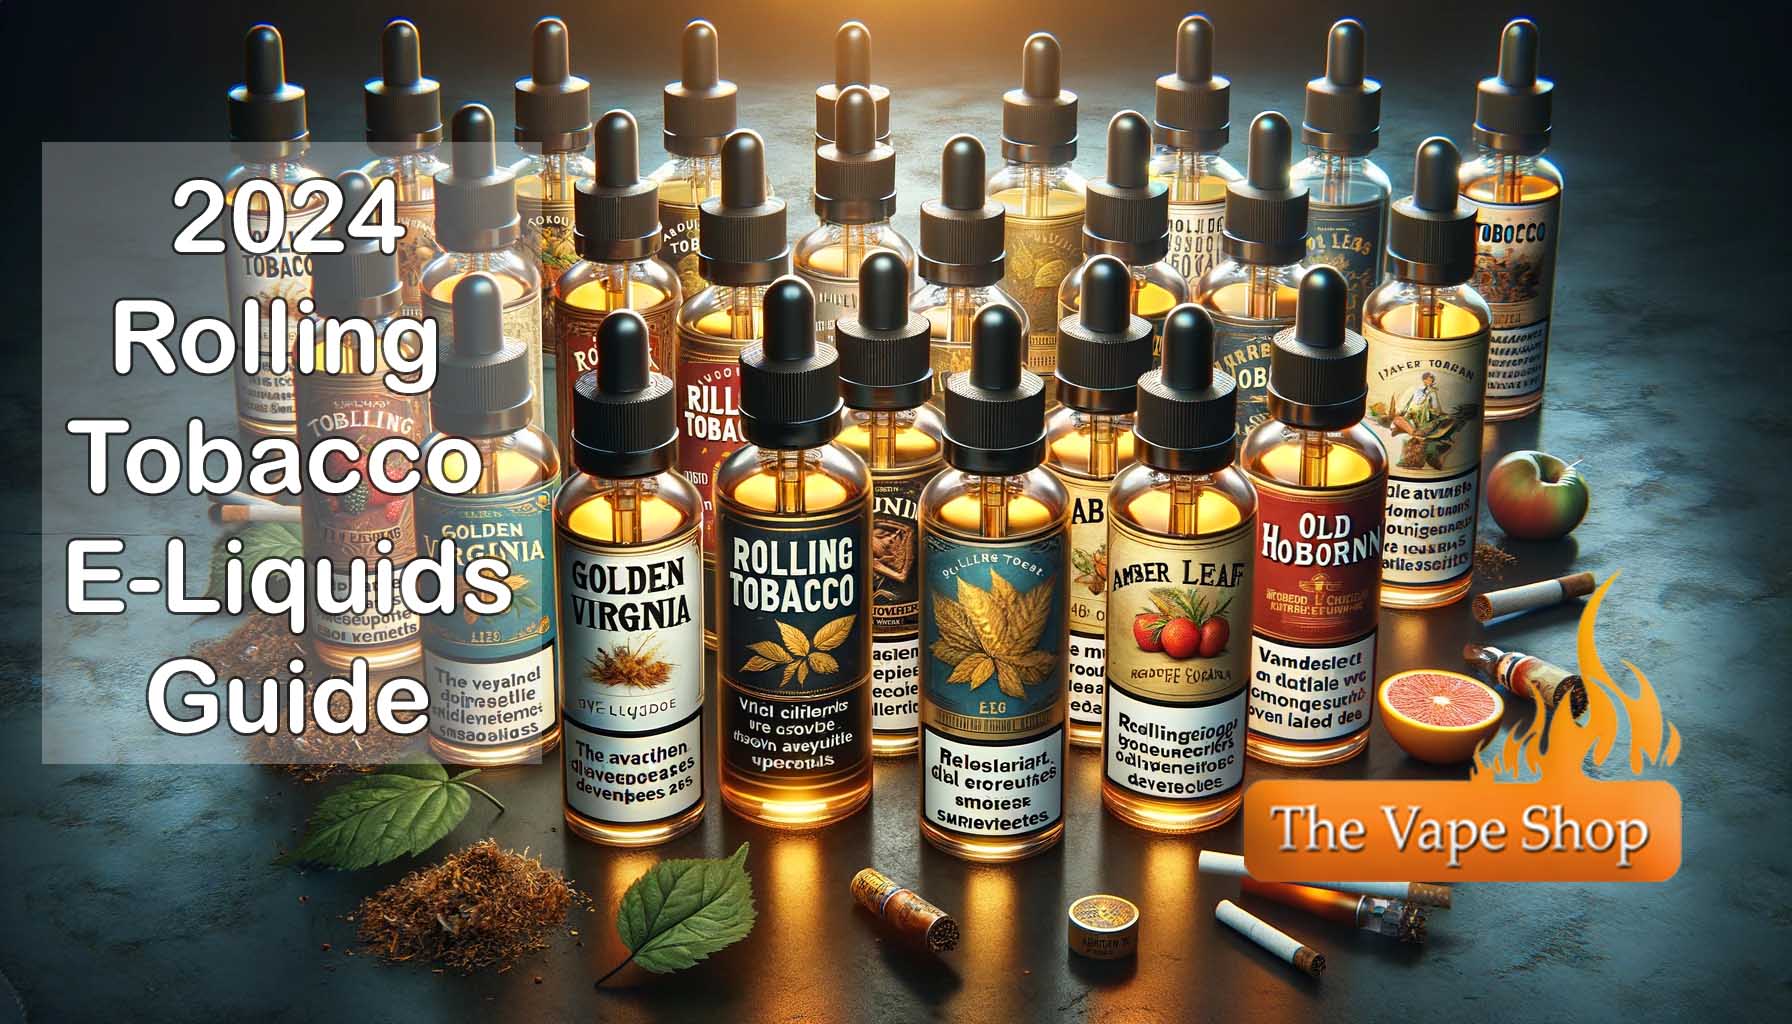 2024 Rolling Tobacco Flavoured E-Liquids Guide by The Vape Shop